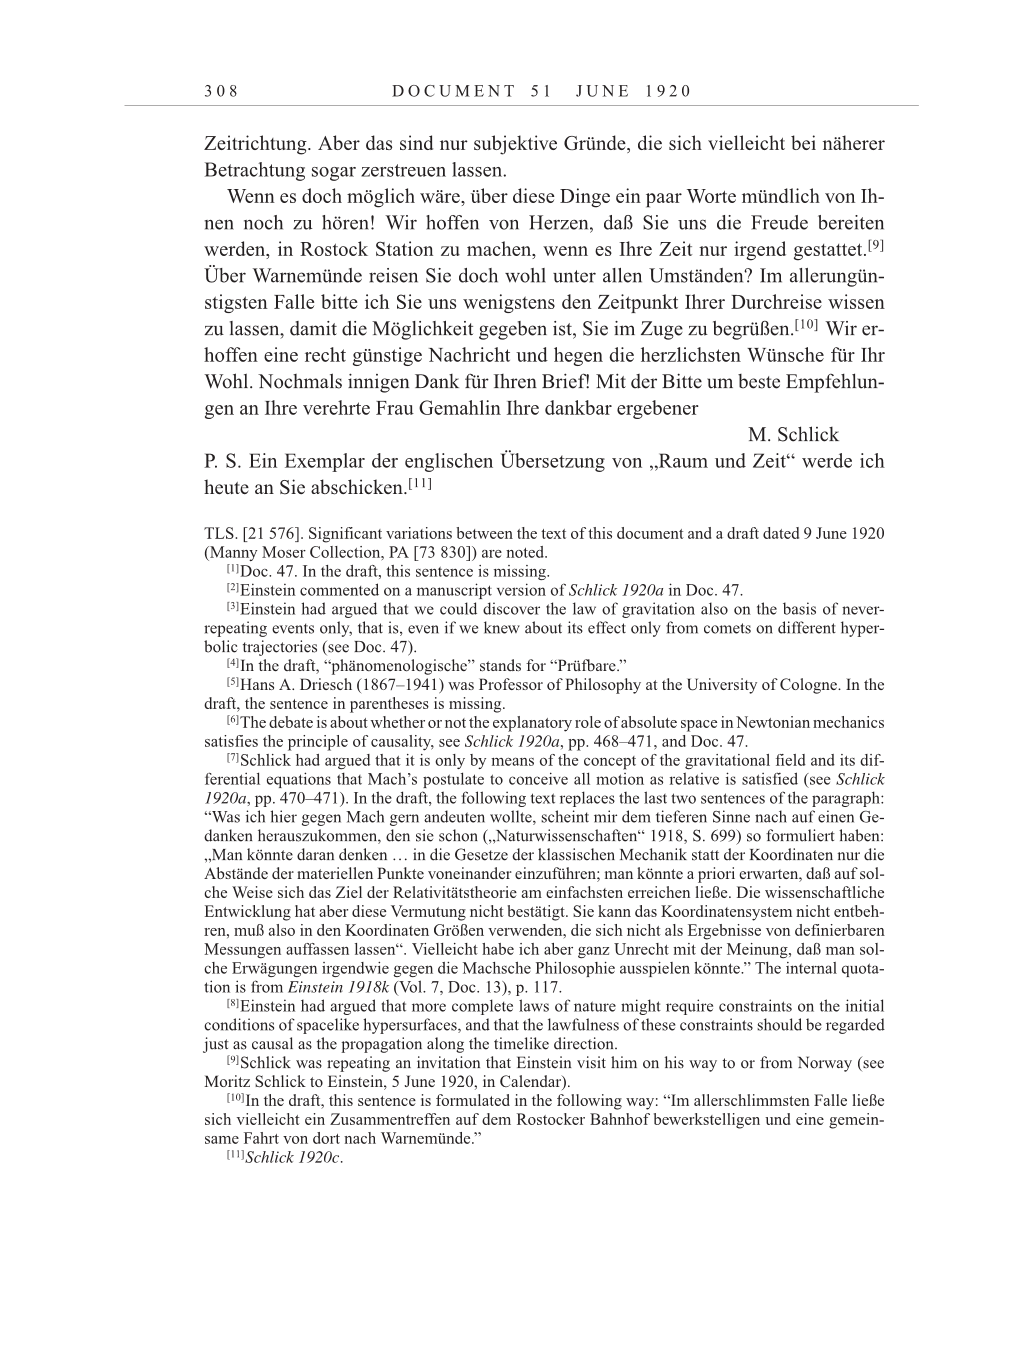 Volume 10: The Berlin Years: Correspondence May-December 1920 / Supplementary Correspondence 1909-1920 page 308